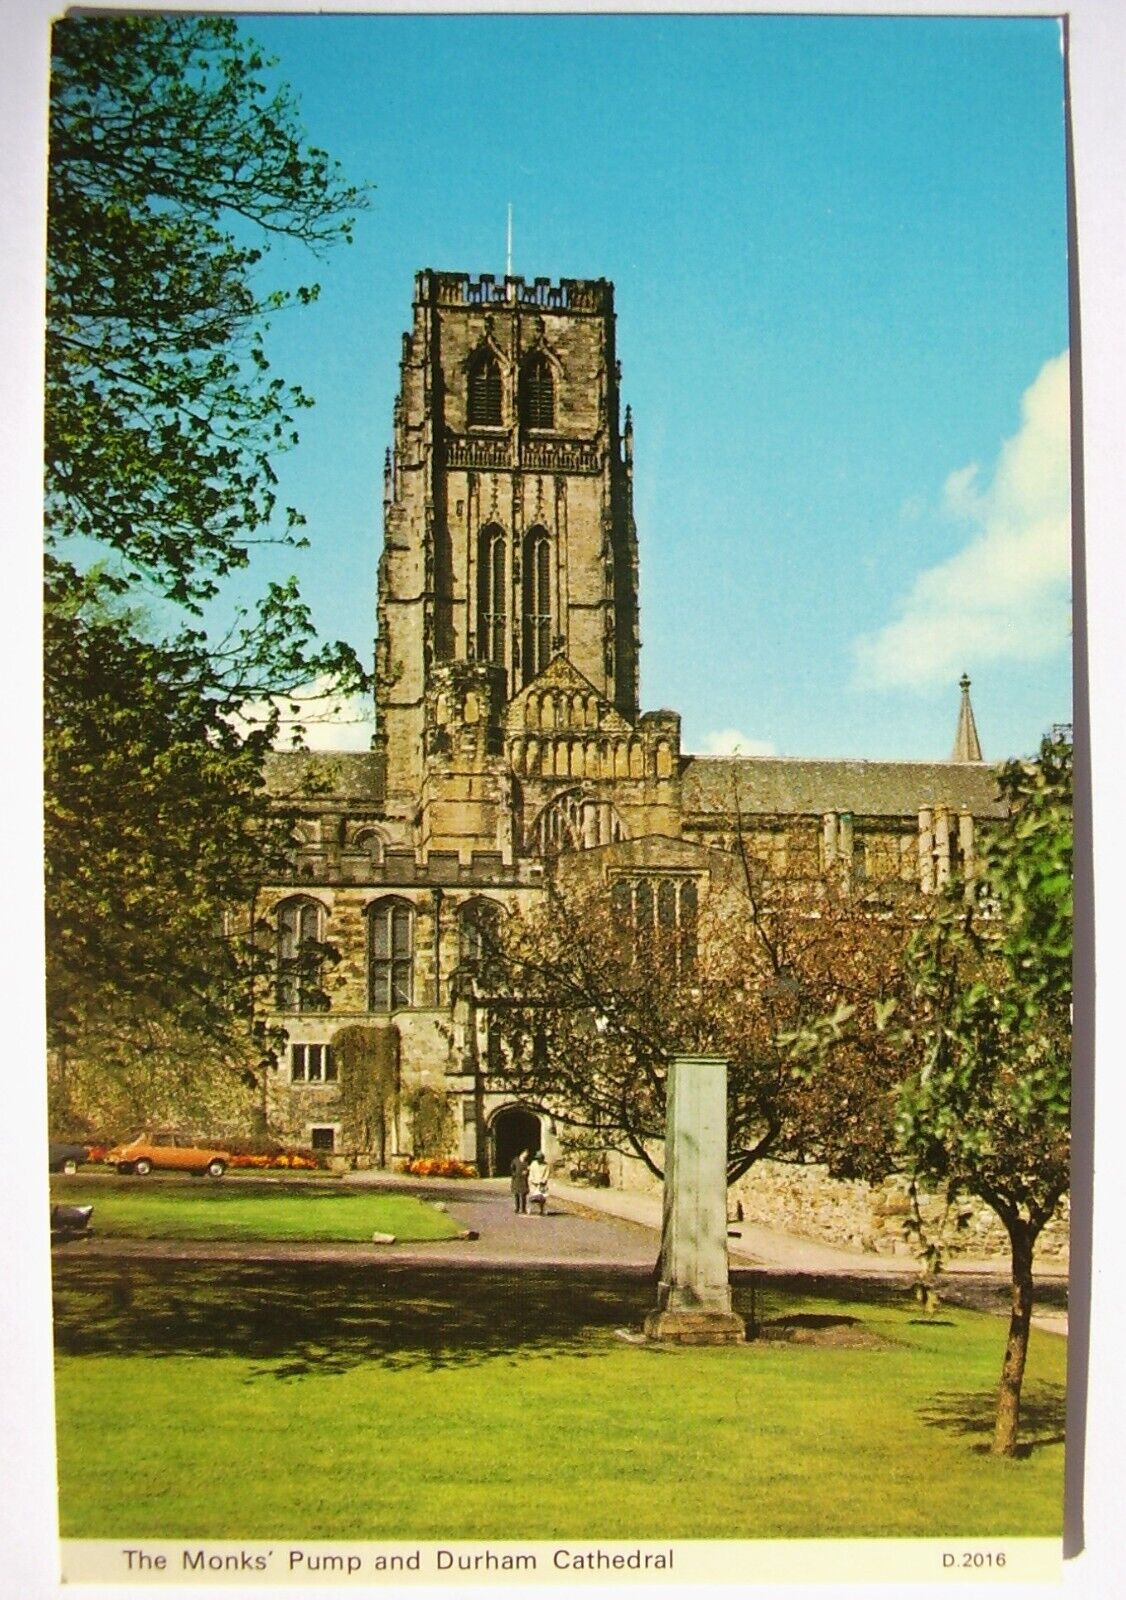 House Clearance - Dennis colour service of the Monk's Pump, Durham Cathedral 1960s